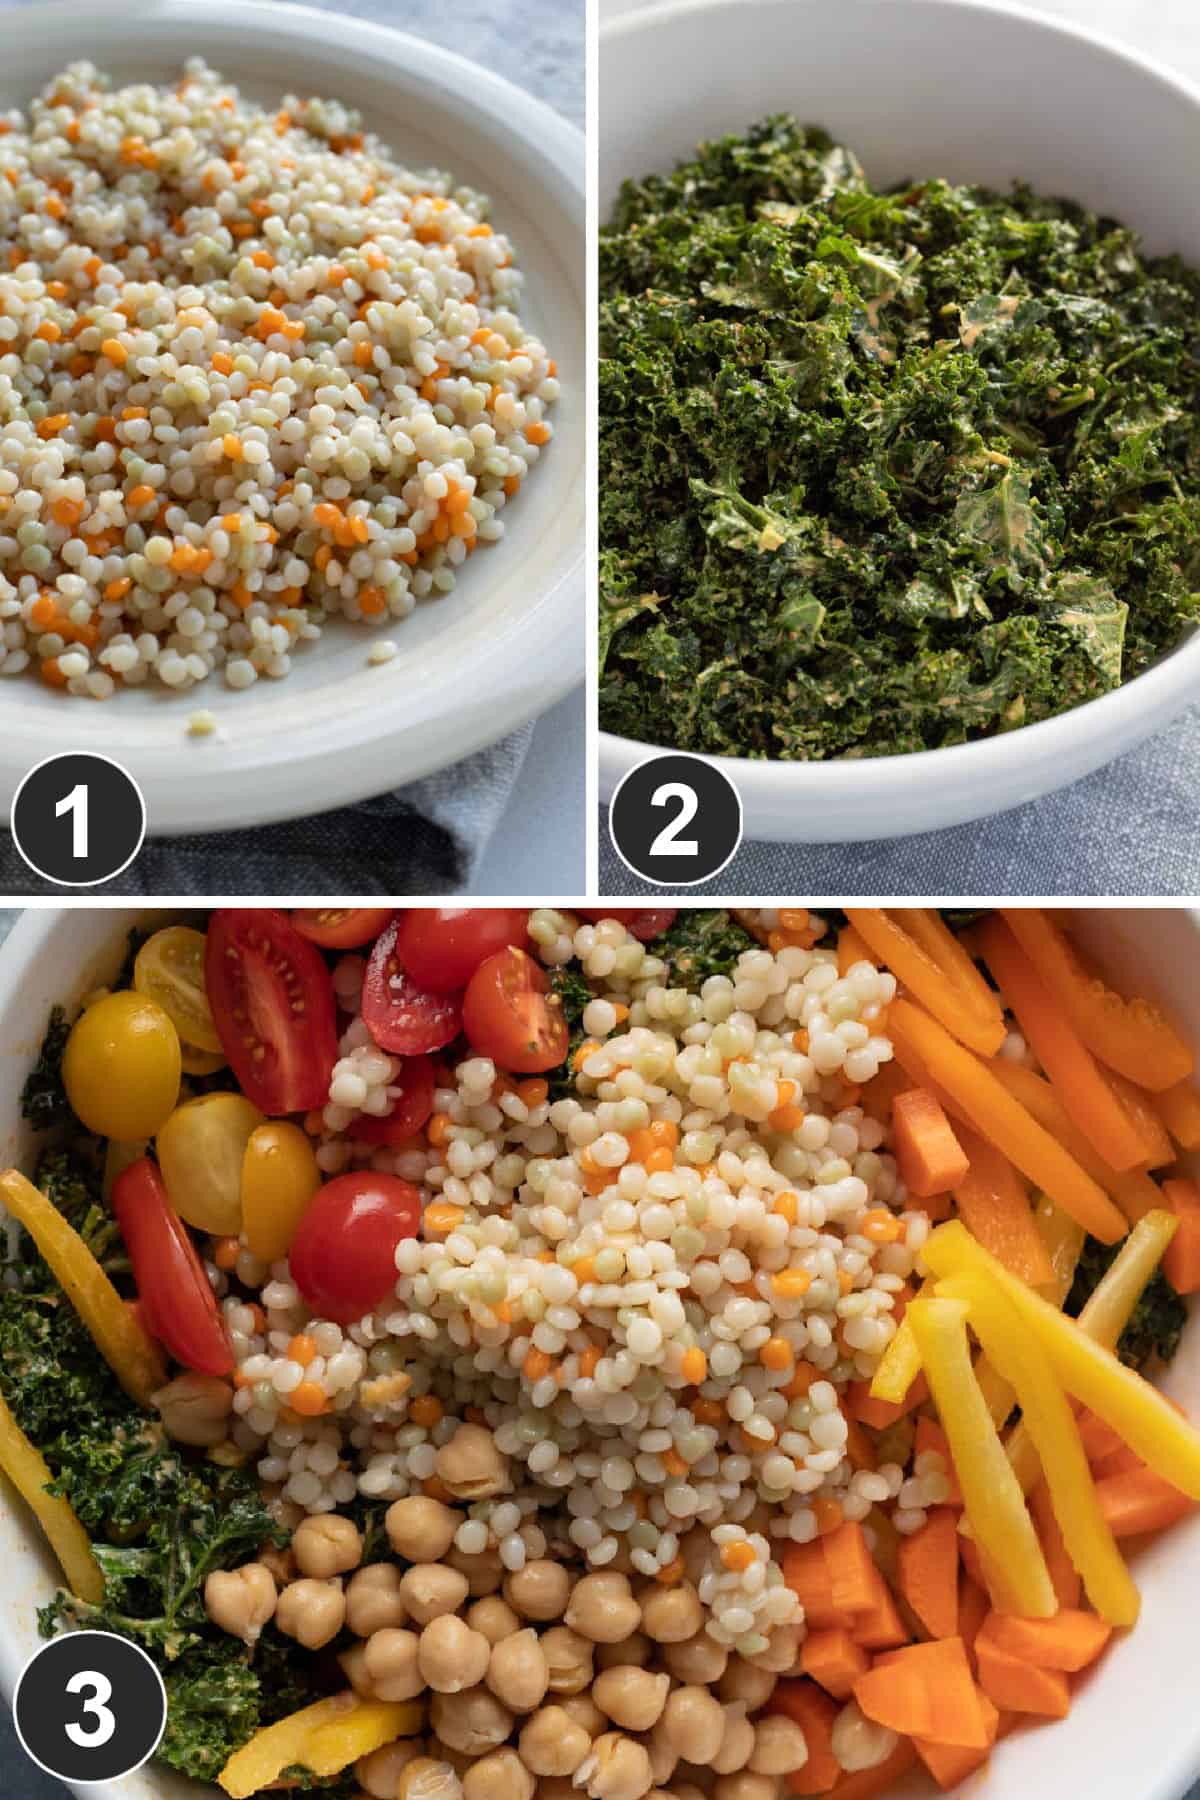 a 3-photo collage showing the steps of assembling the kale salad.